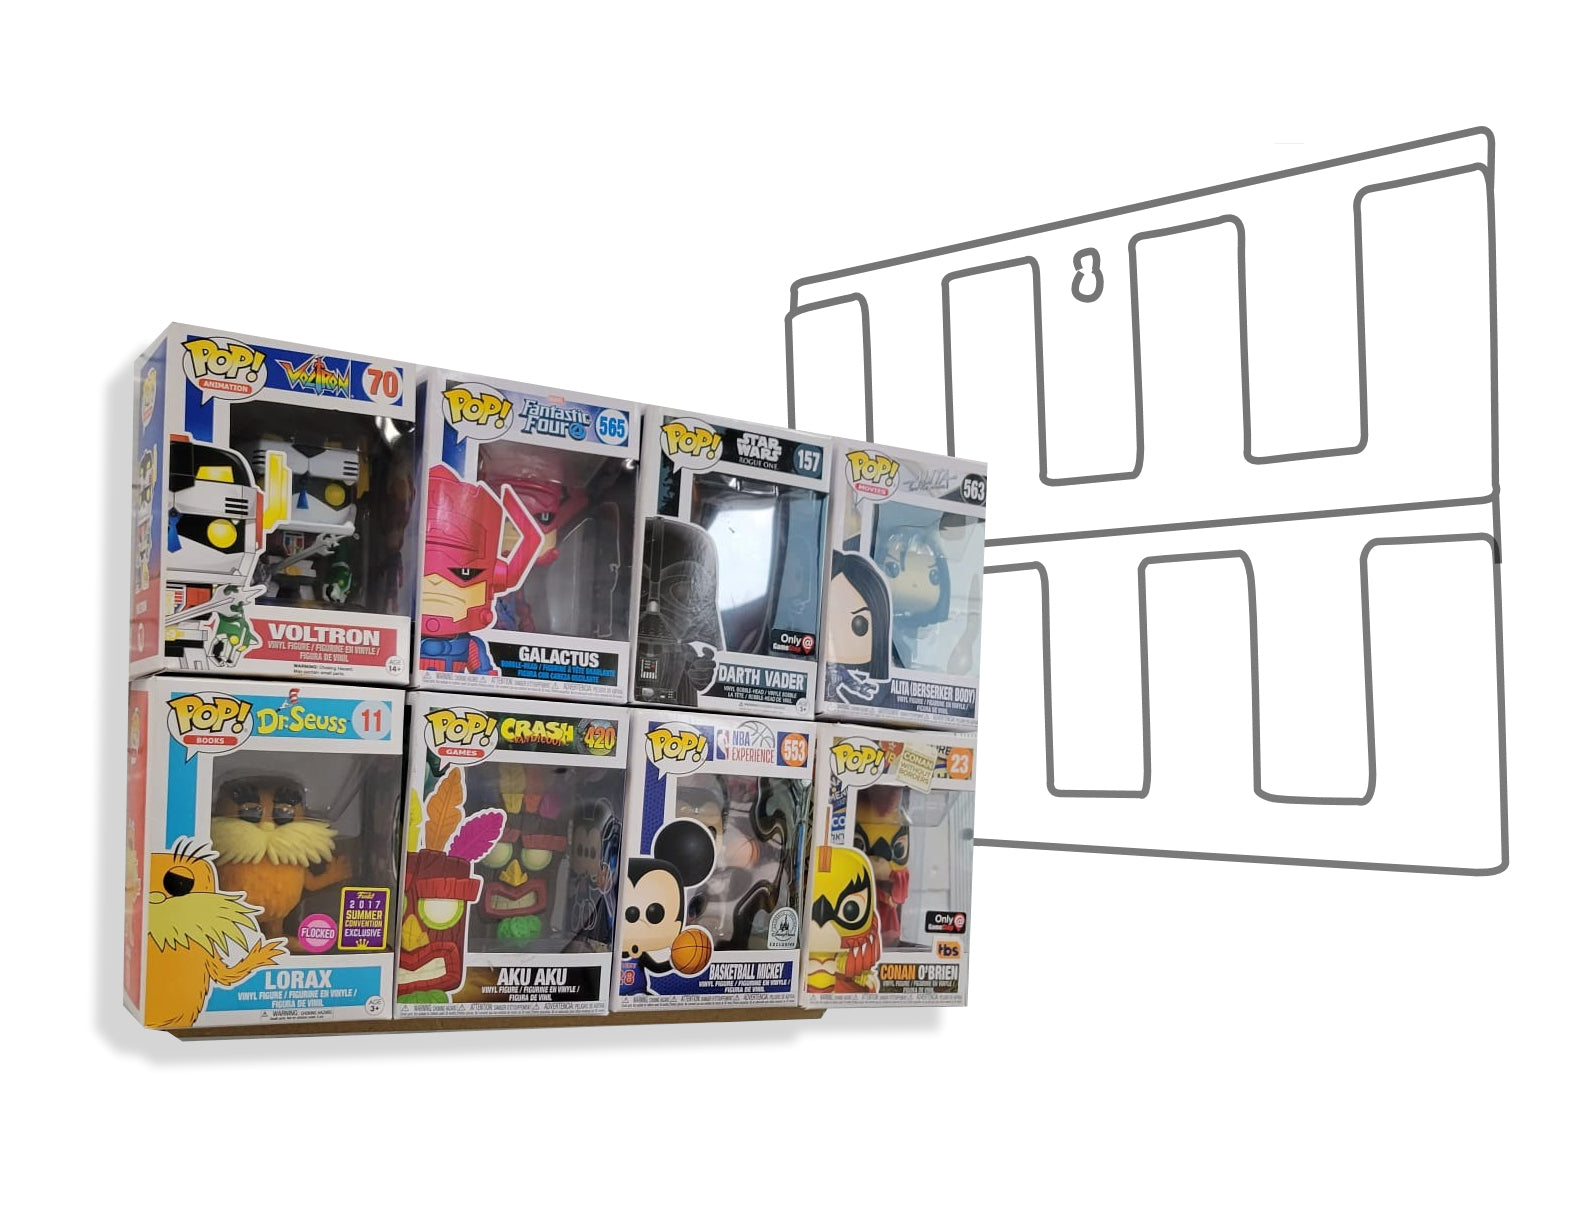 Wall Display Case for 8 Boxed Funko Pop, Bordeless, Shelfless, No Assembly Required, just Hang on